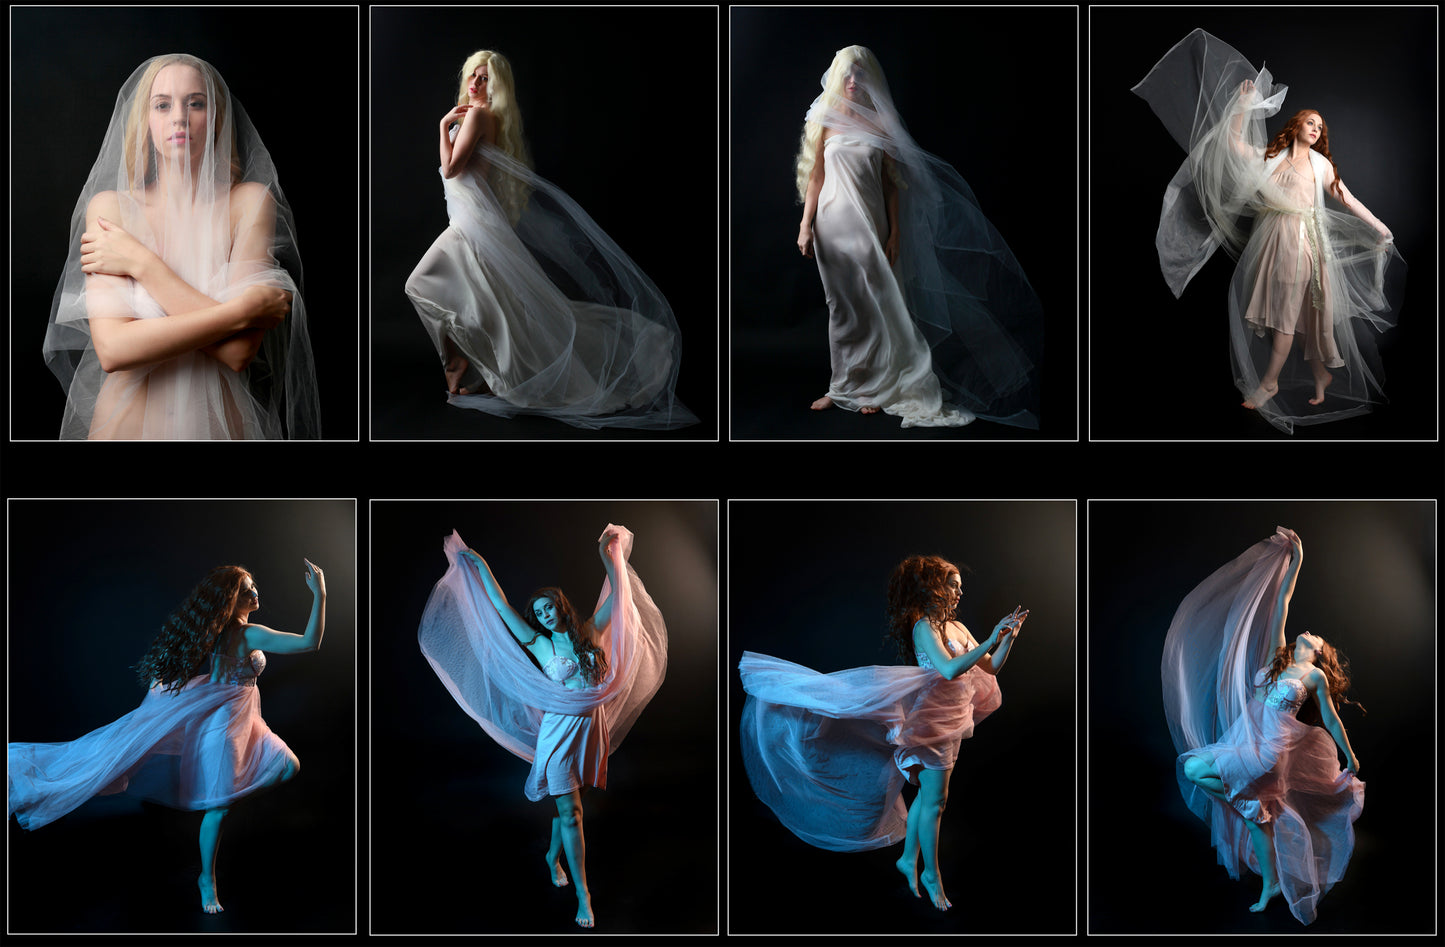 Coloured light and fabric - Stock model Pose Reference Pack